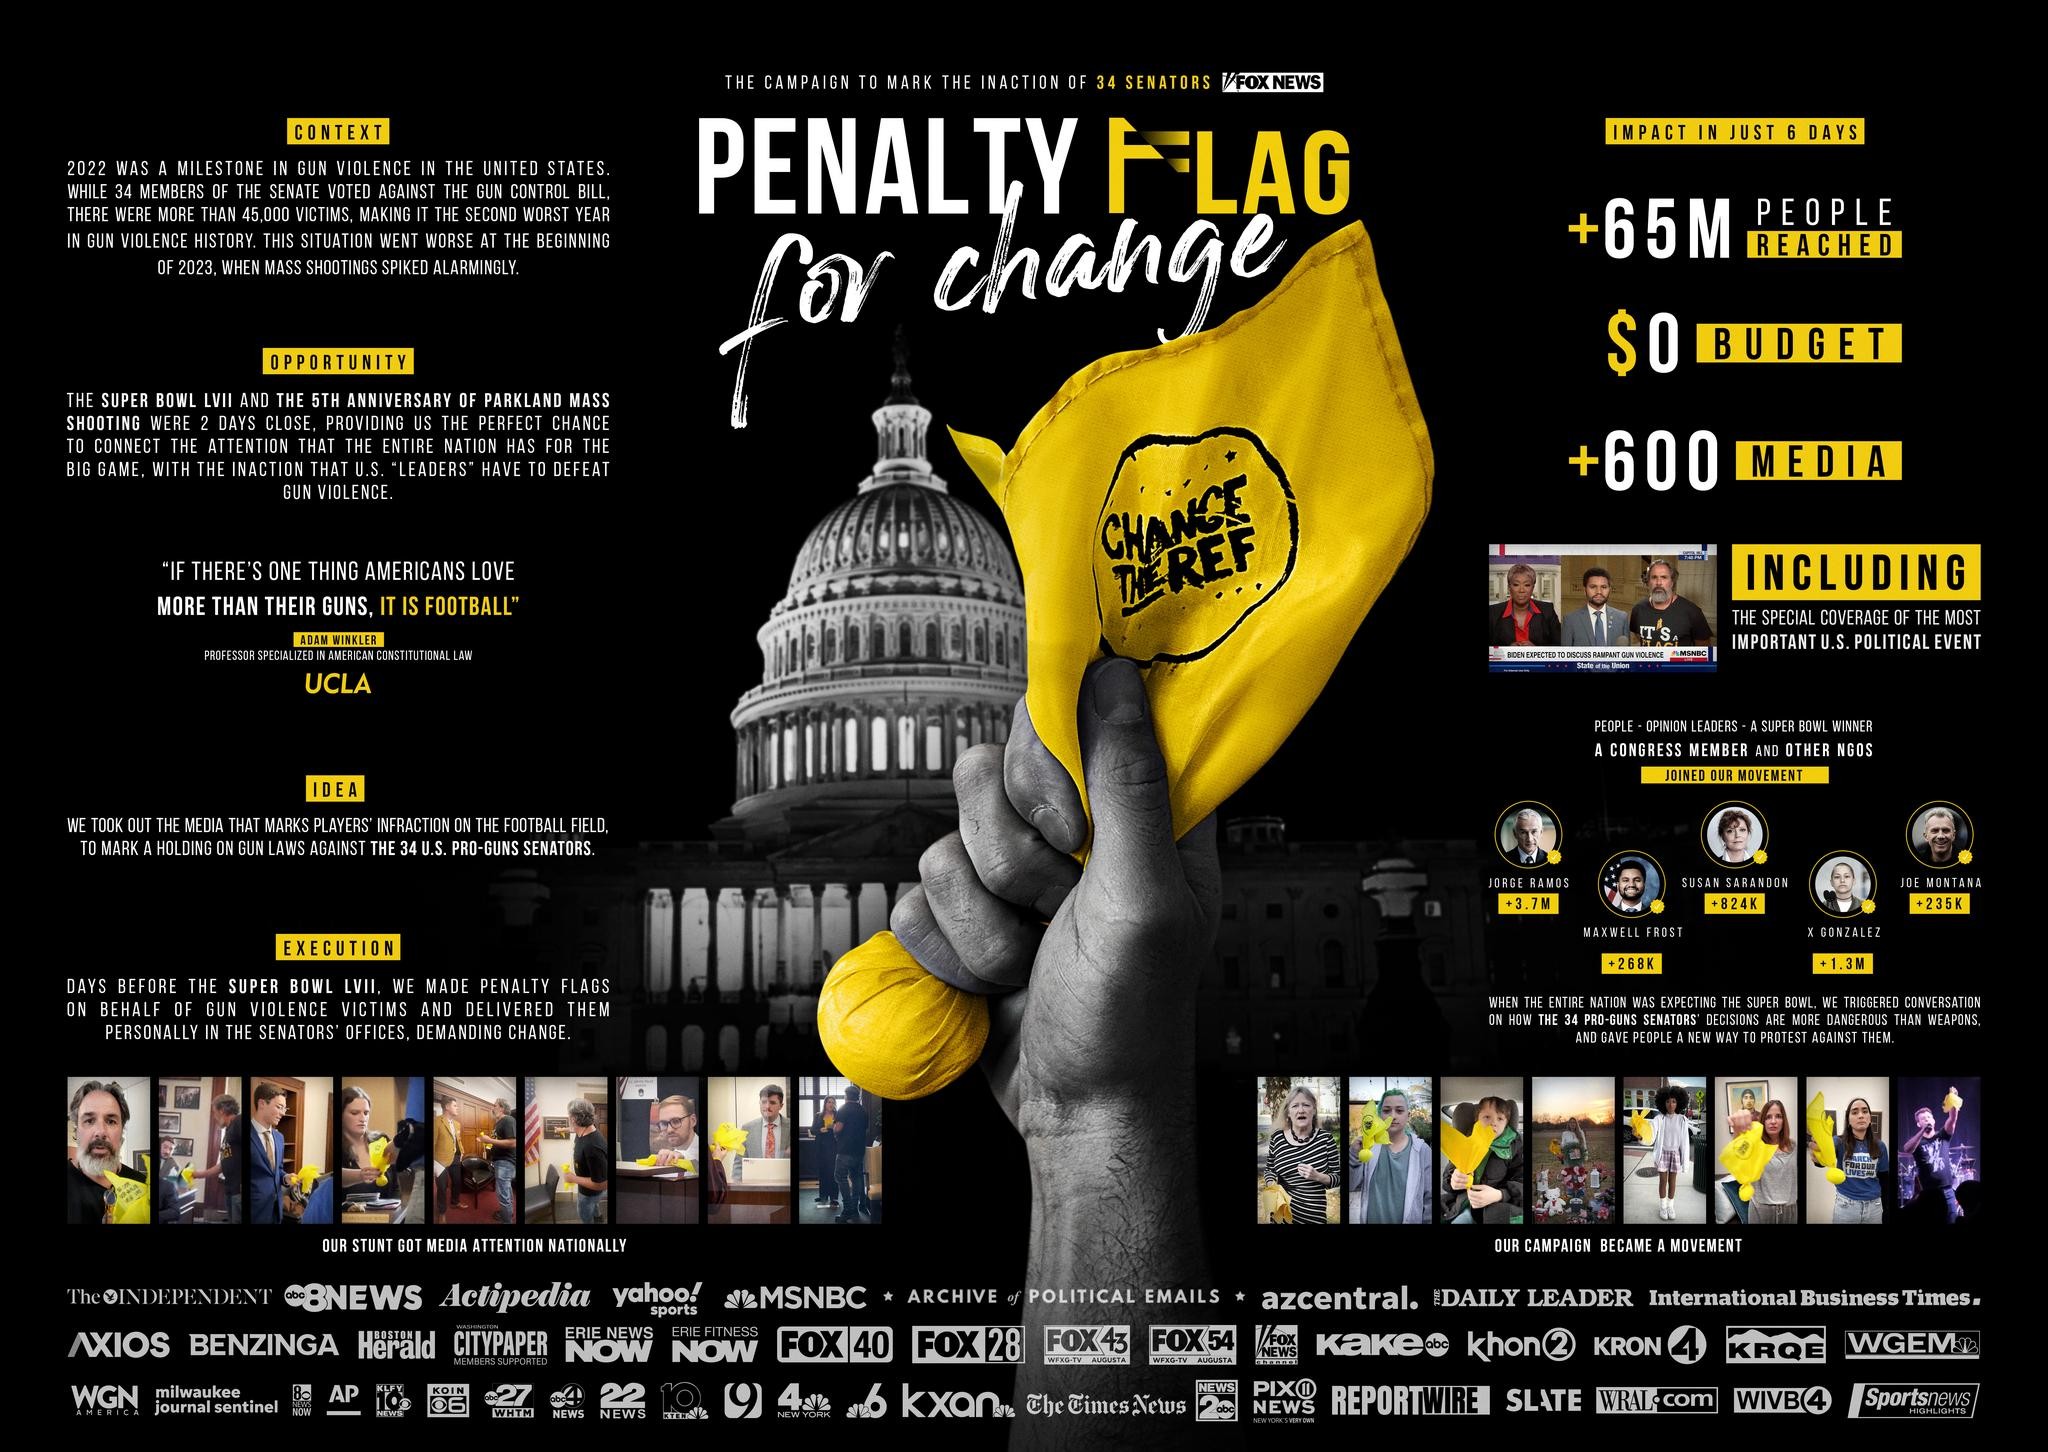 PENALTY FLAG FOR CHANGE